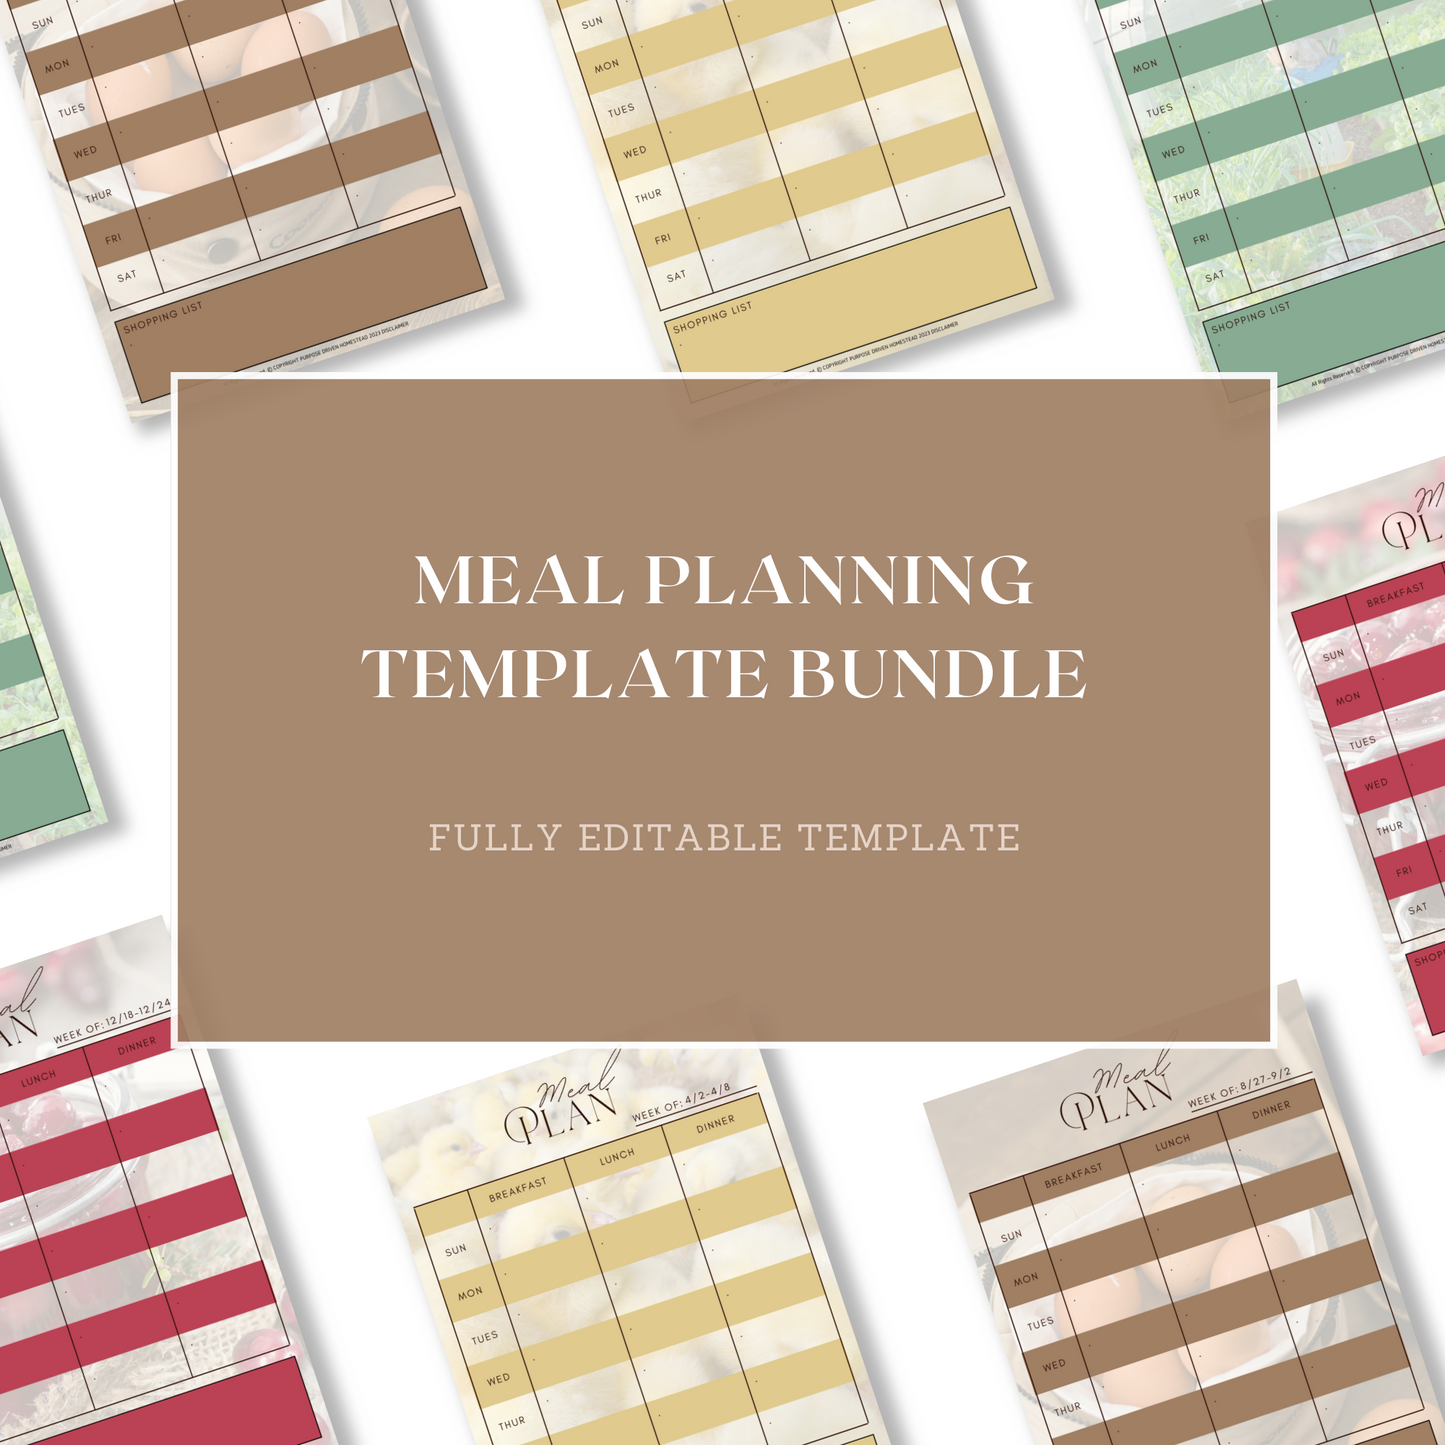 A Well-Fed Family: Weekly Meal Planning Editable Template